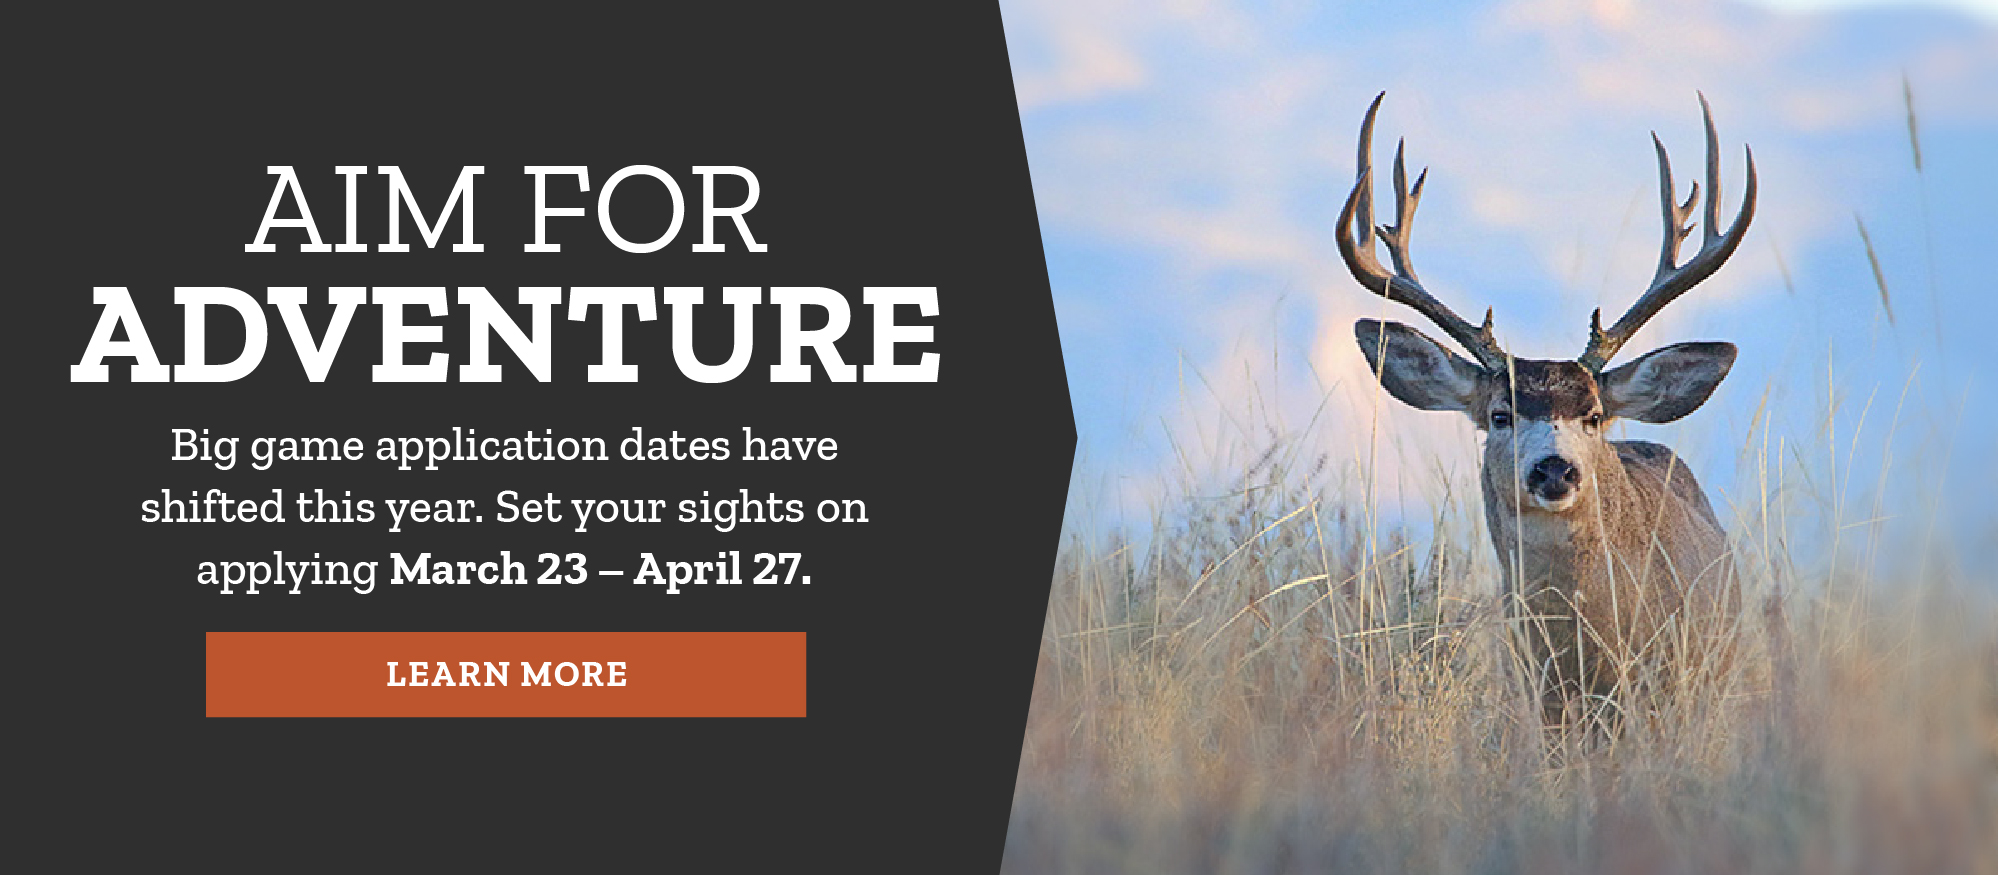 Aim for adventure: 2023 Big Game Application Dates